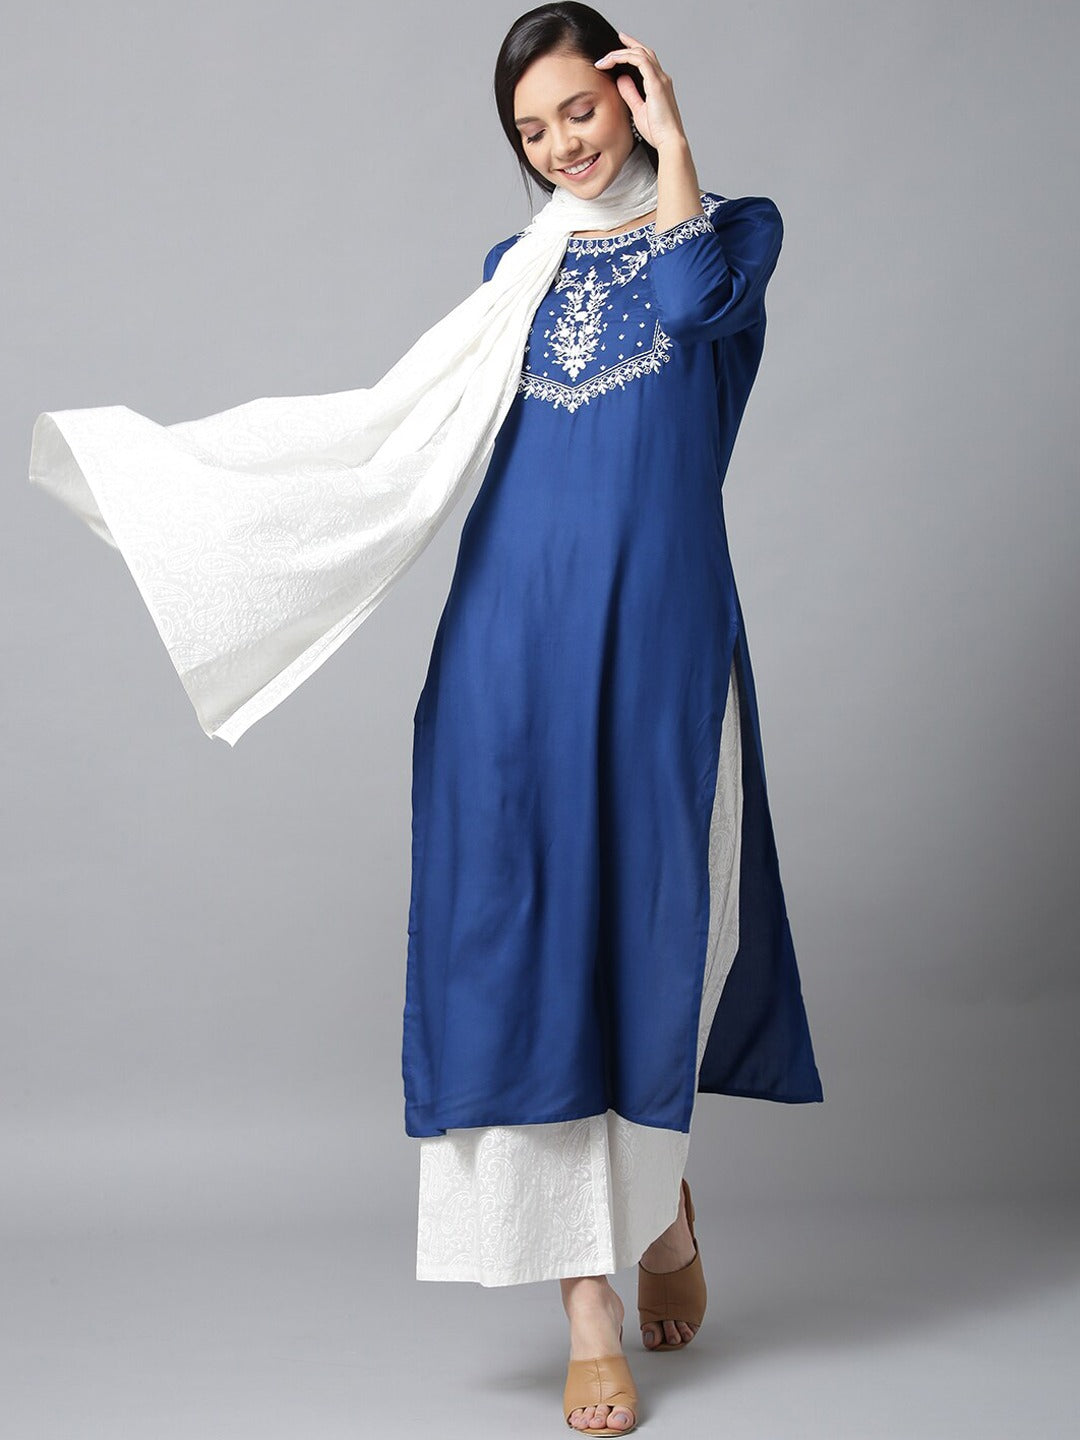 Kurta Palazzo in Blue  & White Yoke - Indian Clothing in Denver, CO, Aurora, CO, Boulder, CO, Fort Collins, CO, Colorado Springs, CO, Parker, CO, Highlands Ranch, CO, Cherry Creek, CO, Centennial, CO, and Longmont, CO. Nationwide shipping USA - India Fashion X